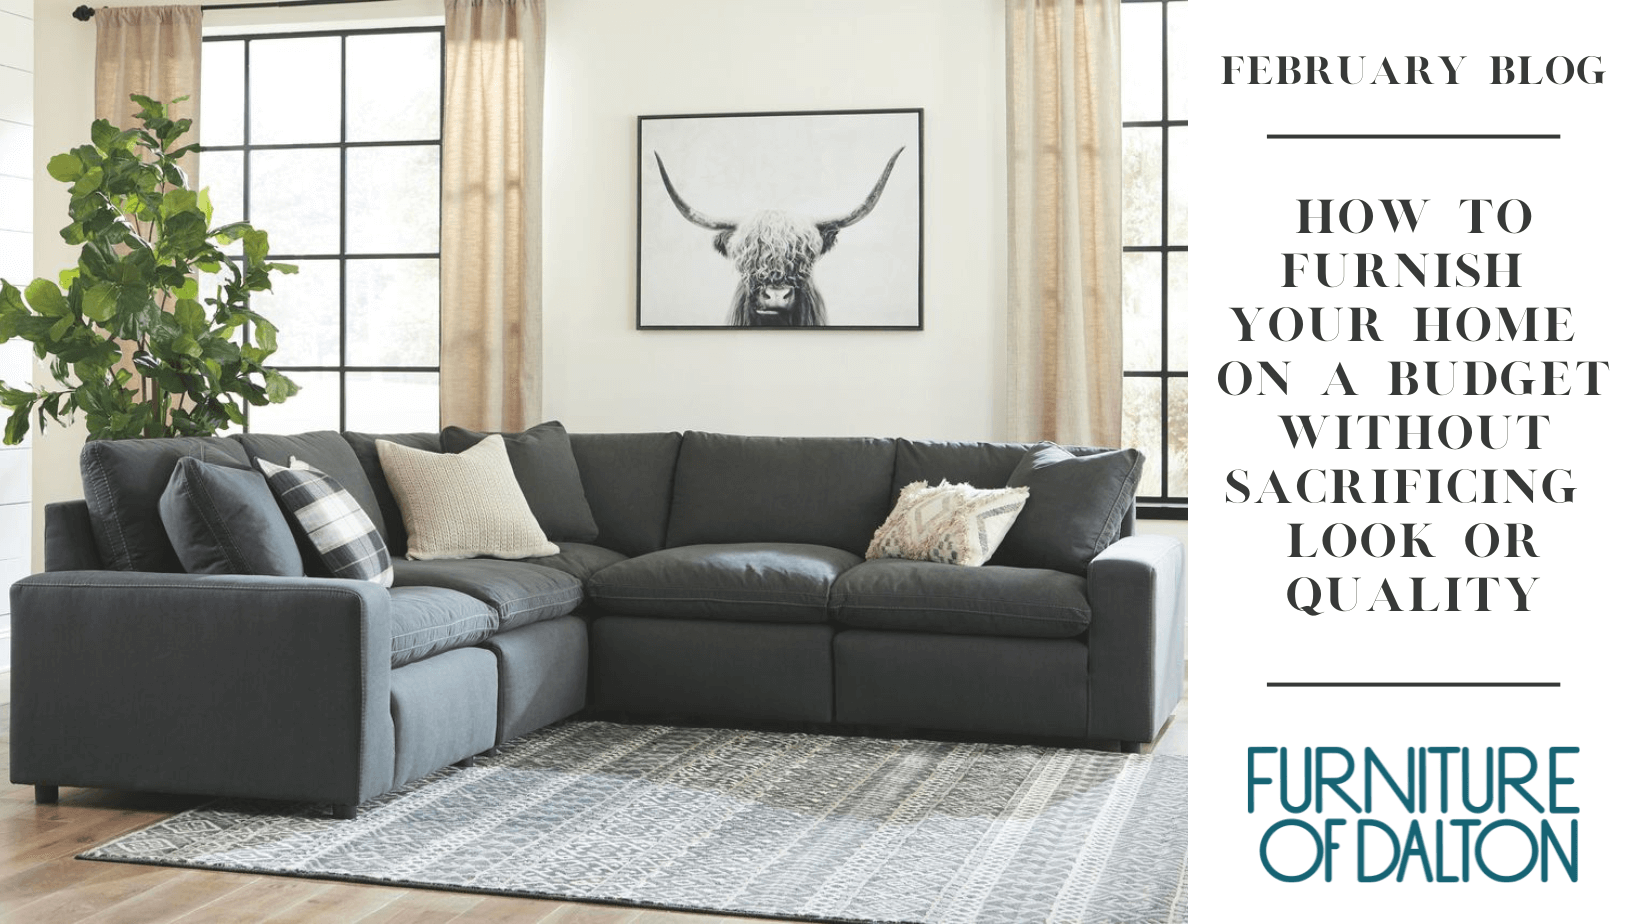 How to furnish your home on a budget without sacrificing look & quality 